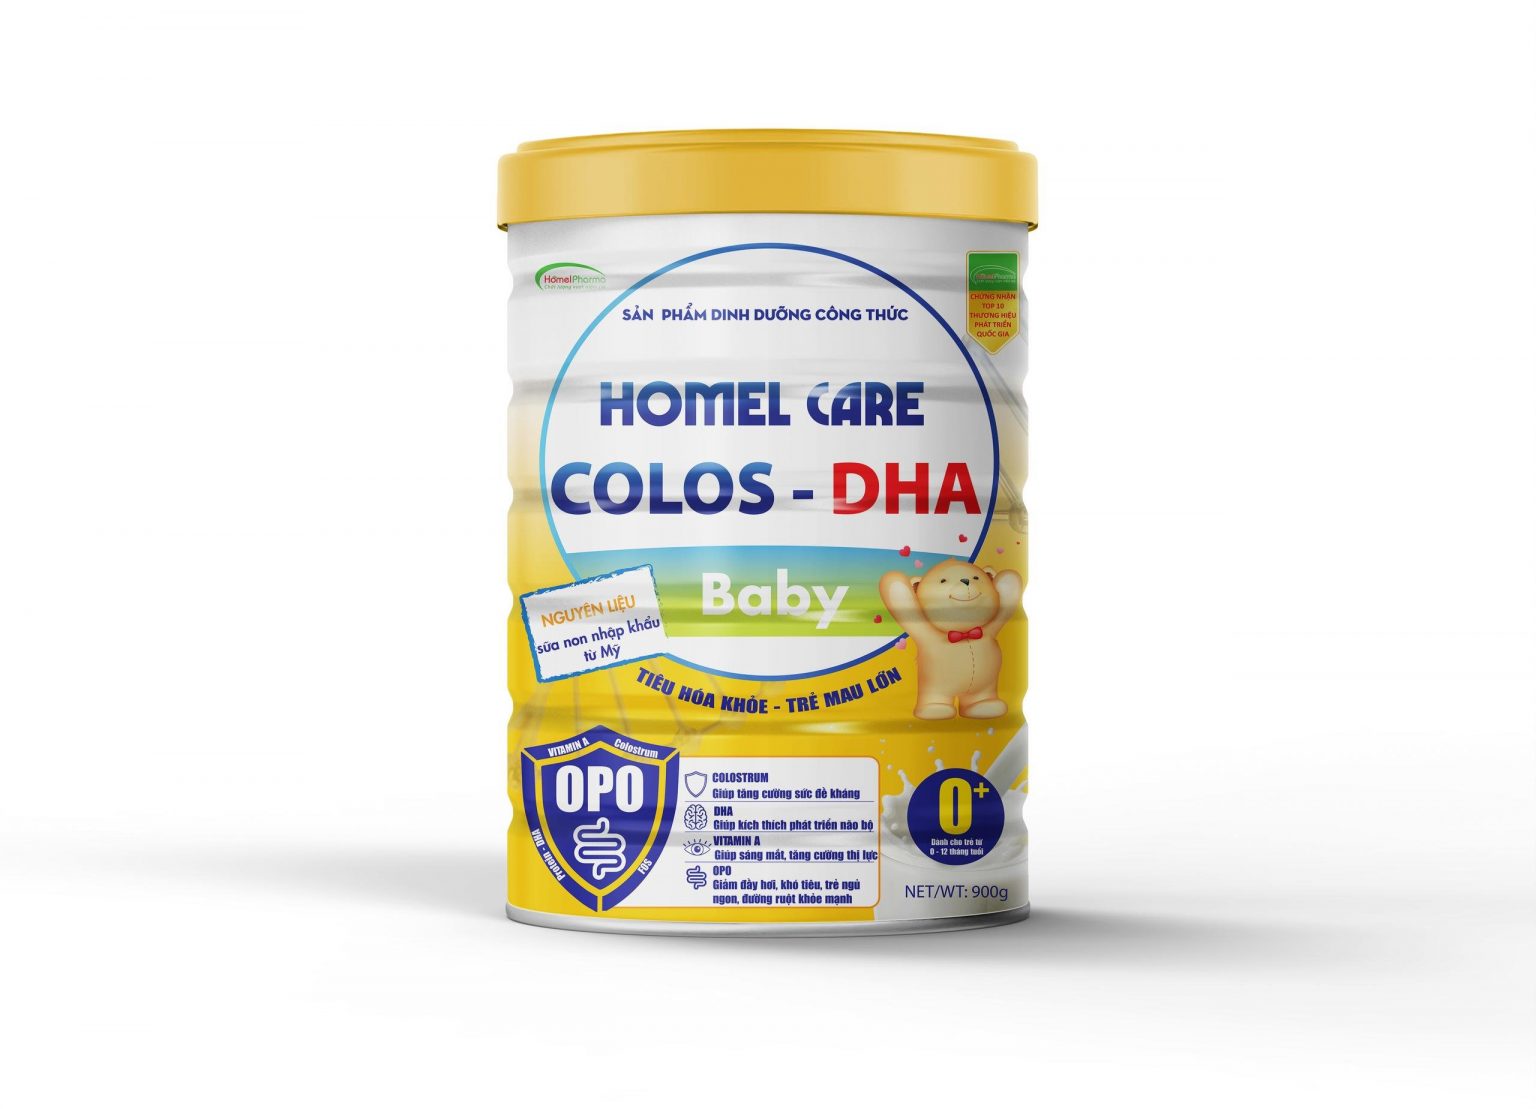 Homel Care Colos - DHA Baby